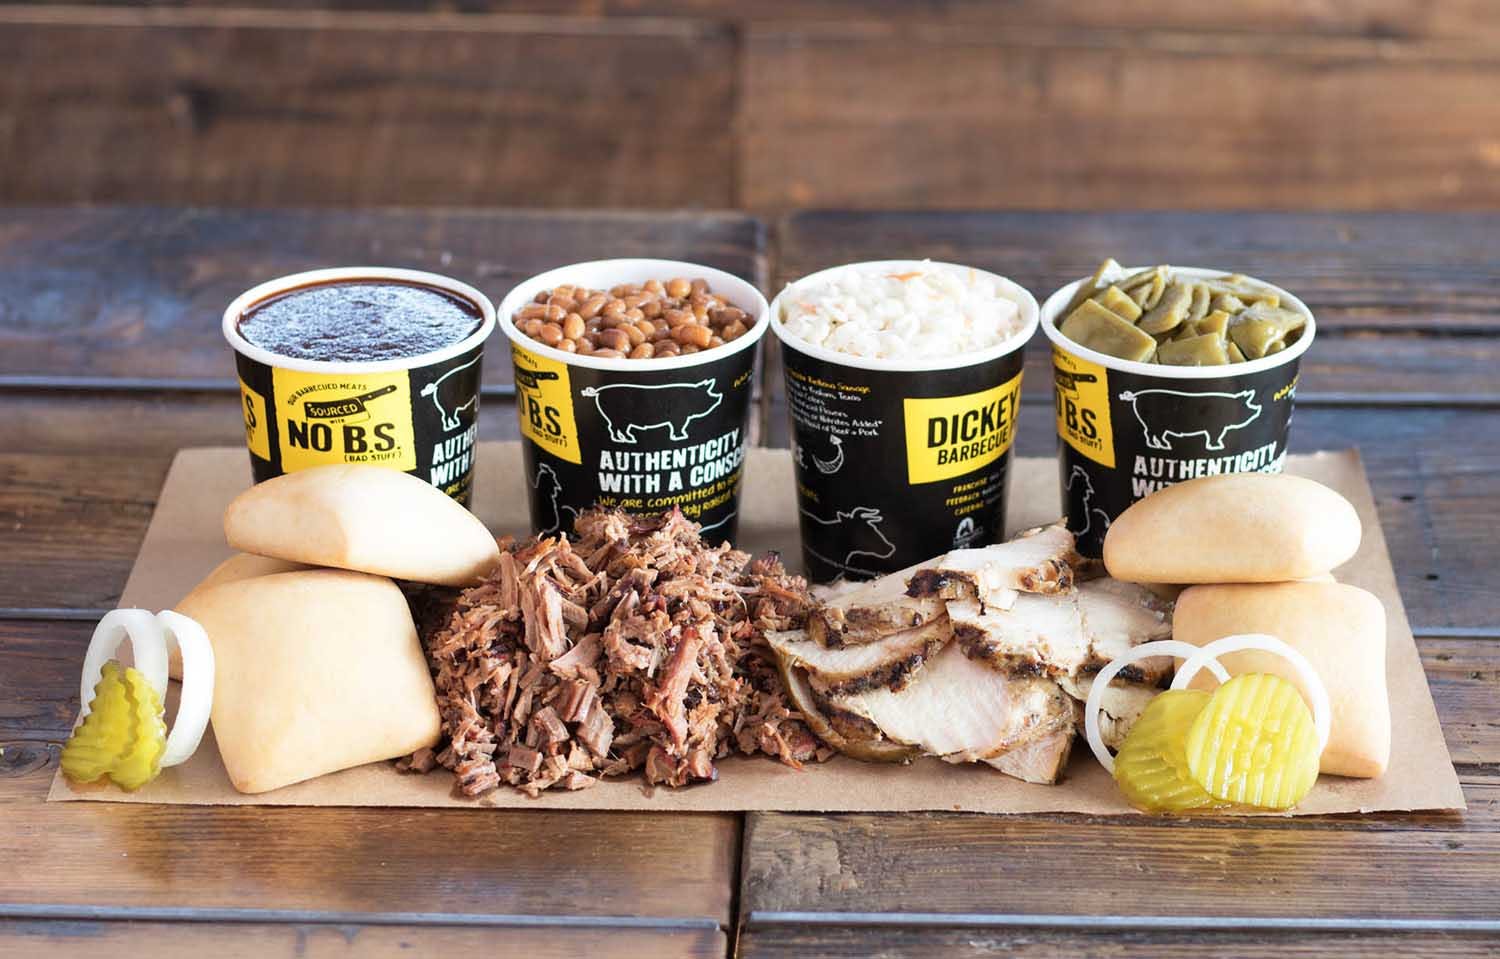 Fast Casual: Dickey's Barbecue brought to Florida by local entrepreneur